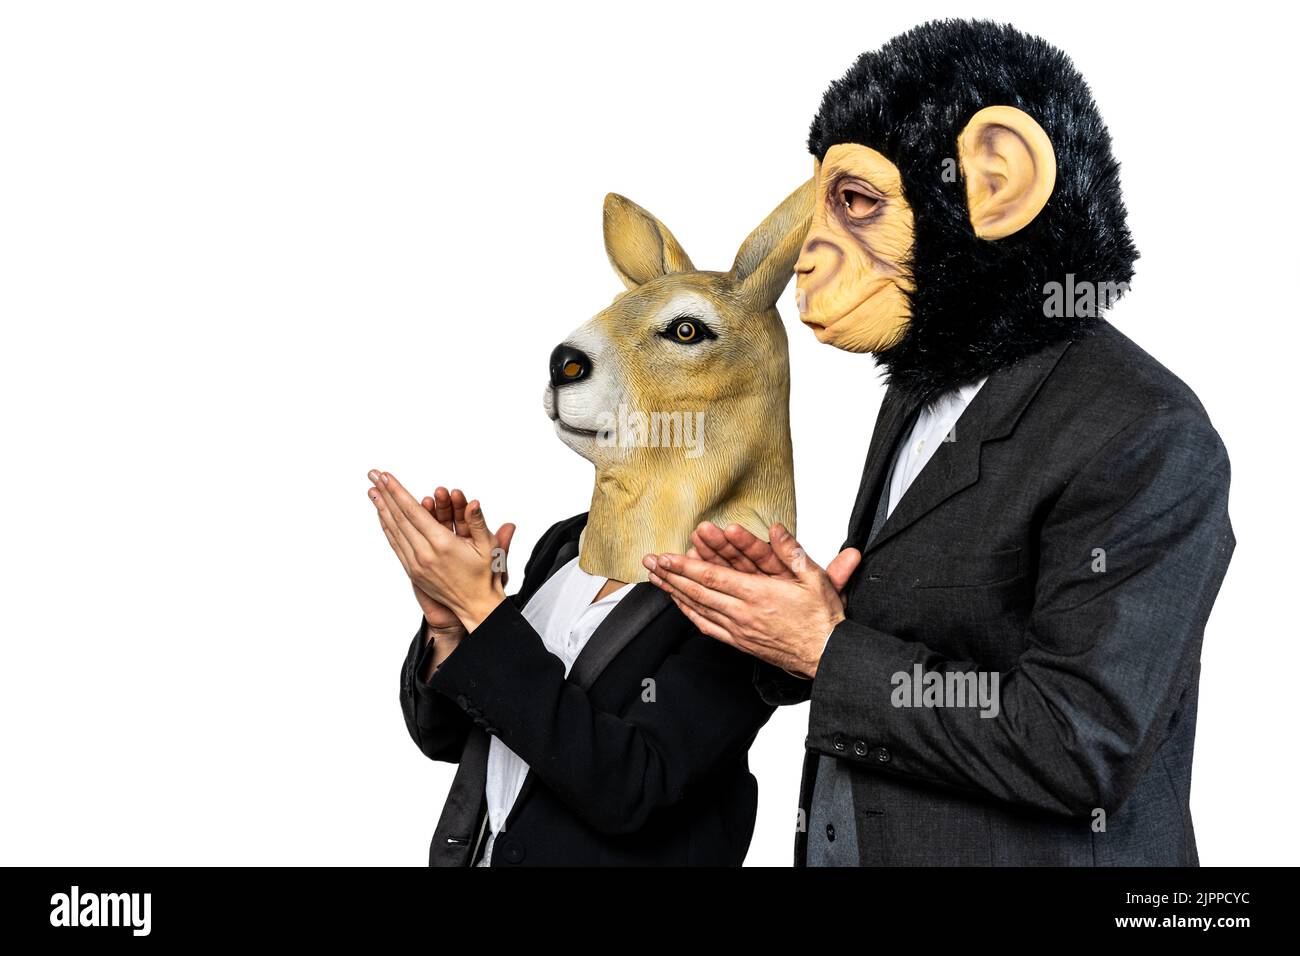 Business kangaroo woman and business monkey man clapping their hands, company talk or meeting concept. Isolated white background Stock Photo